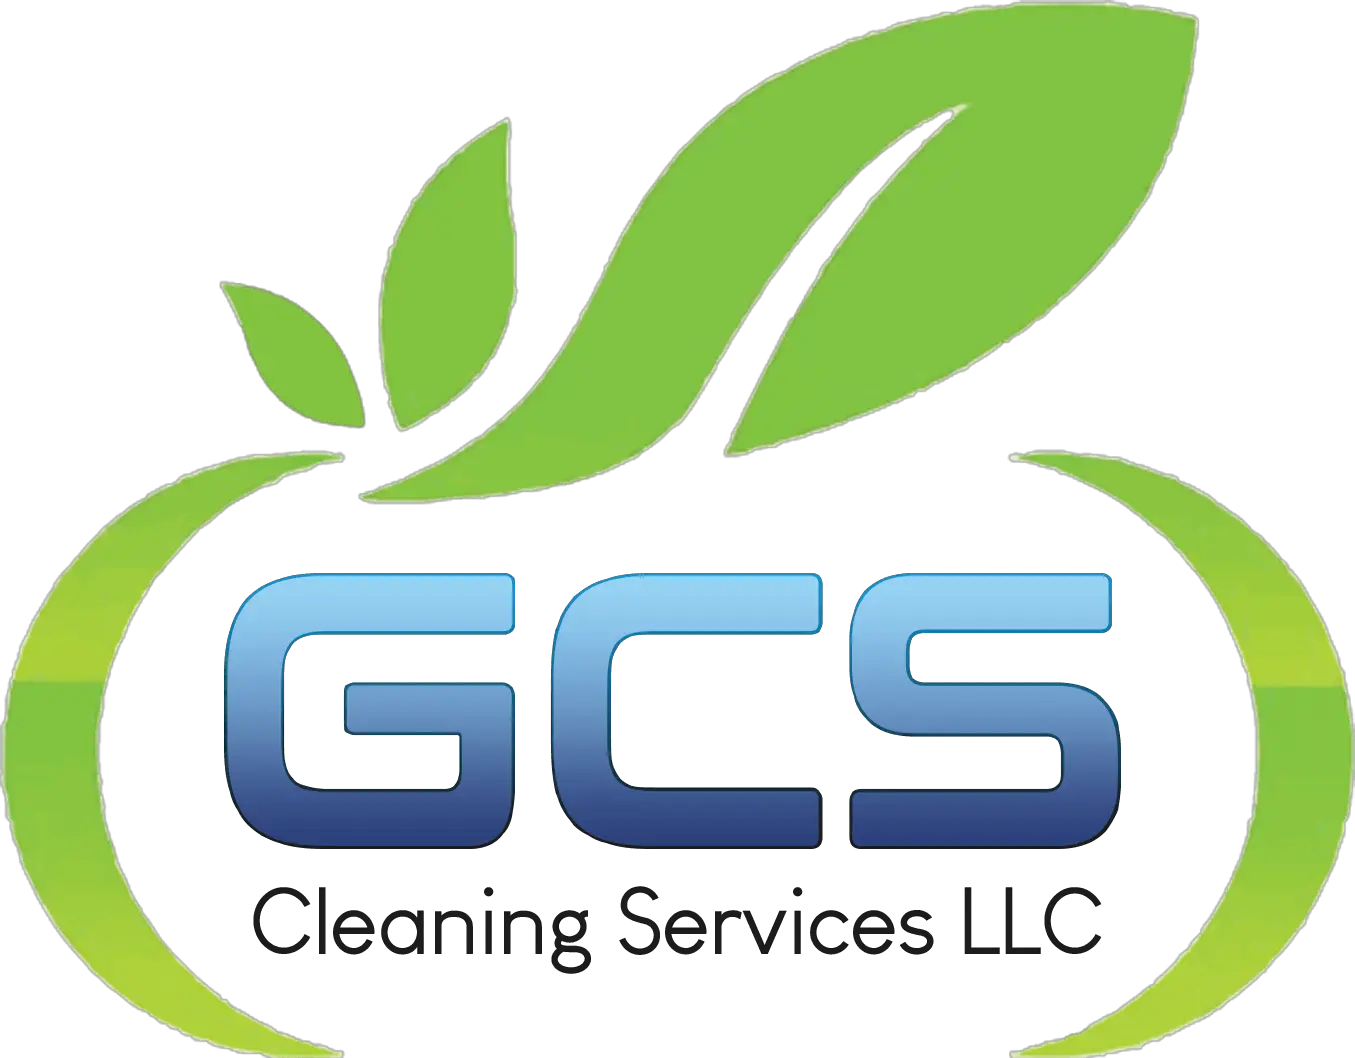 GCS Cleaning Services